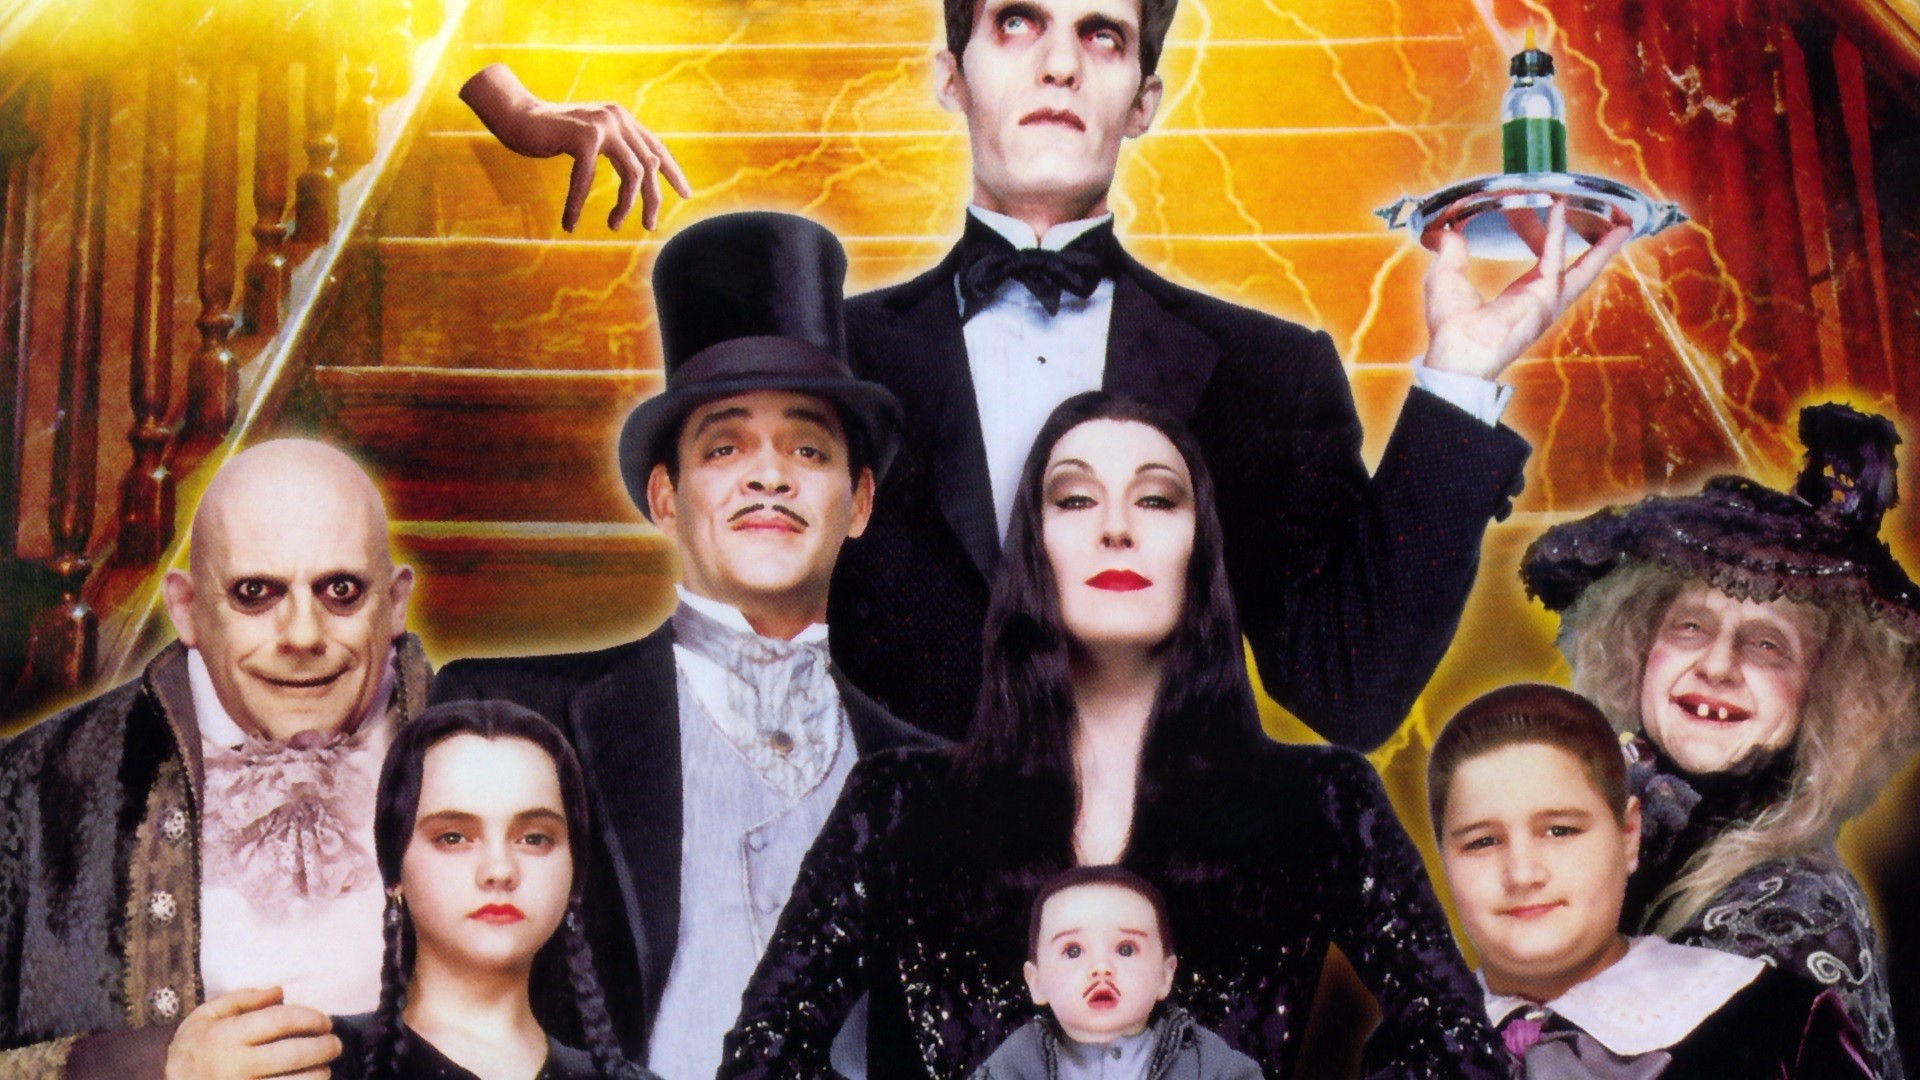 Addams Family Wallpaper (58+ images)